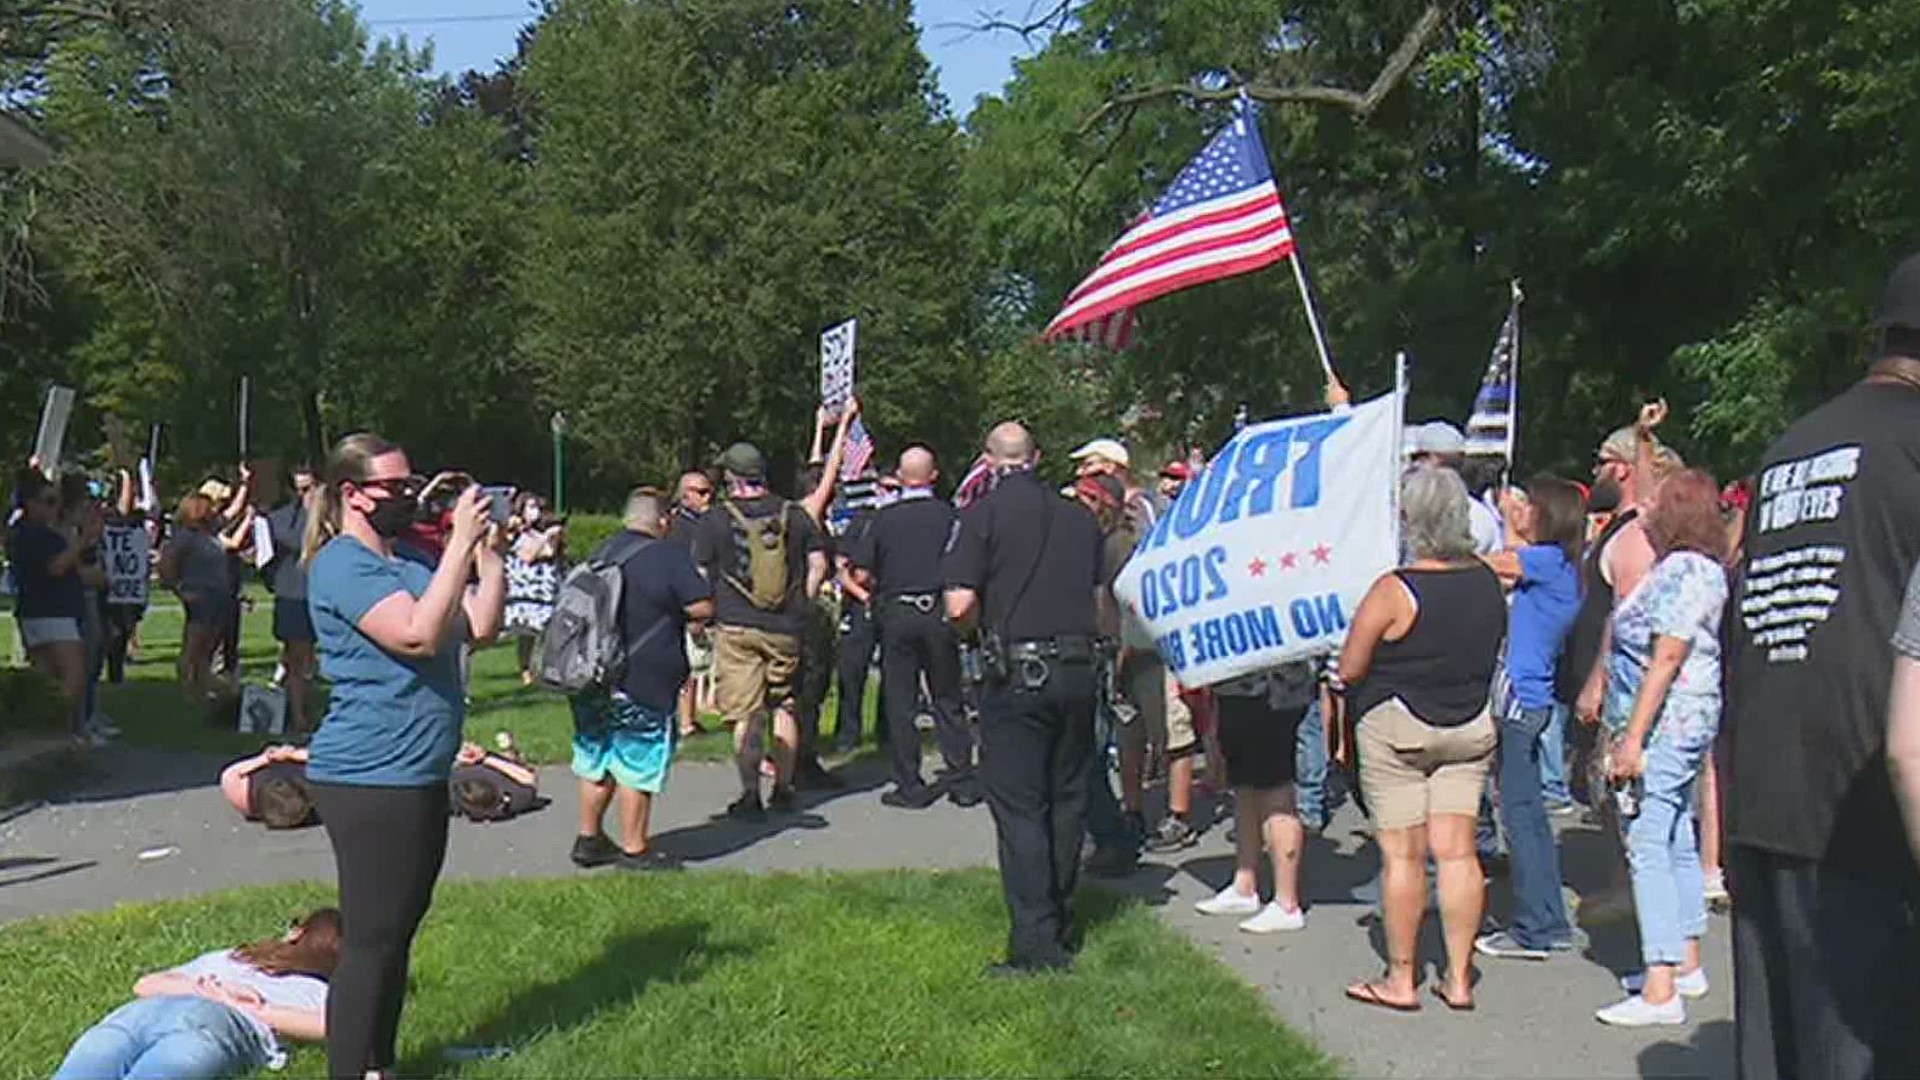 Protesters for a Black Lives Matter protest met up at the Palmerton Borough Park Saturday. Counter-protesters also showed up and arguments spurred from both sides.